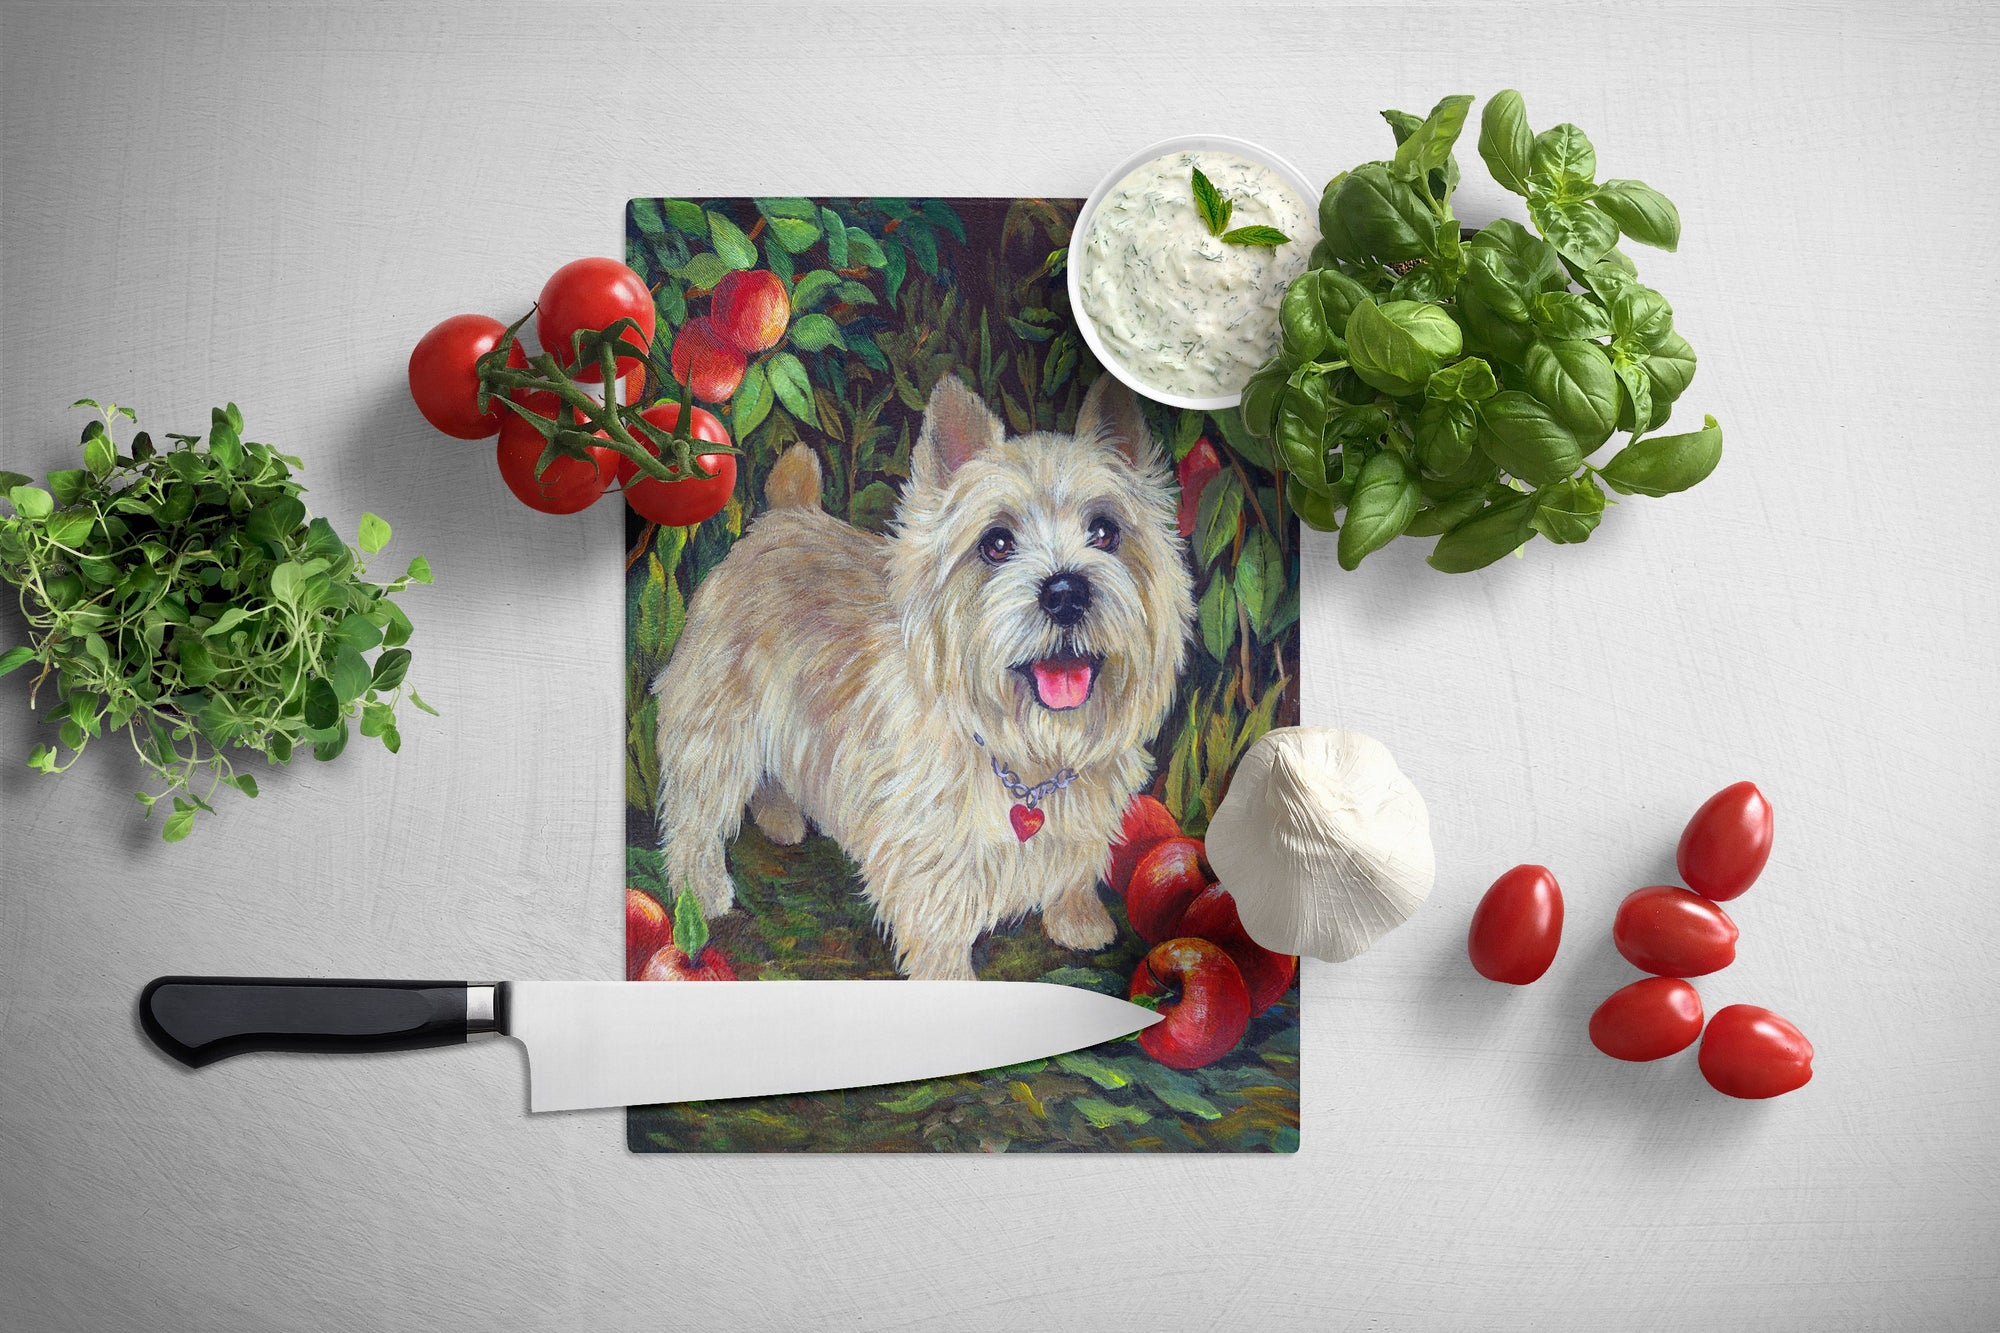 Cairn Terrier Apples Glass Cutting Board Large PPP3042LCB by Caroline's Treasures